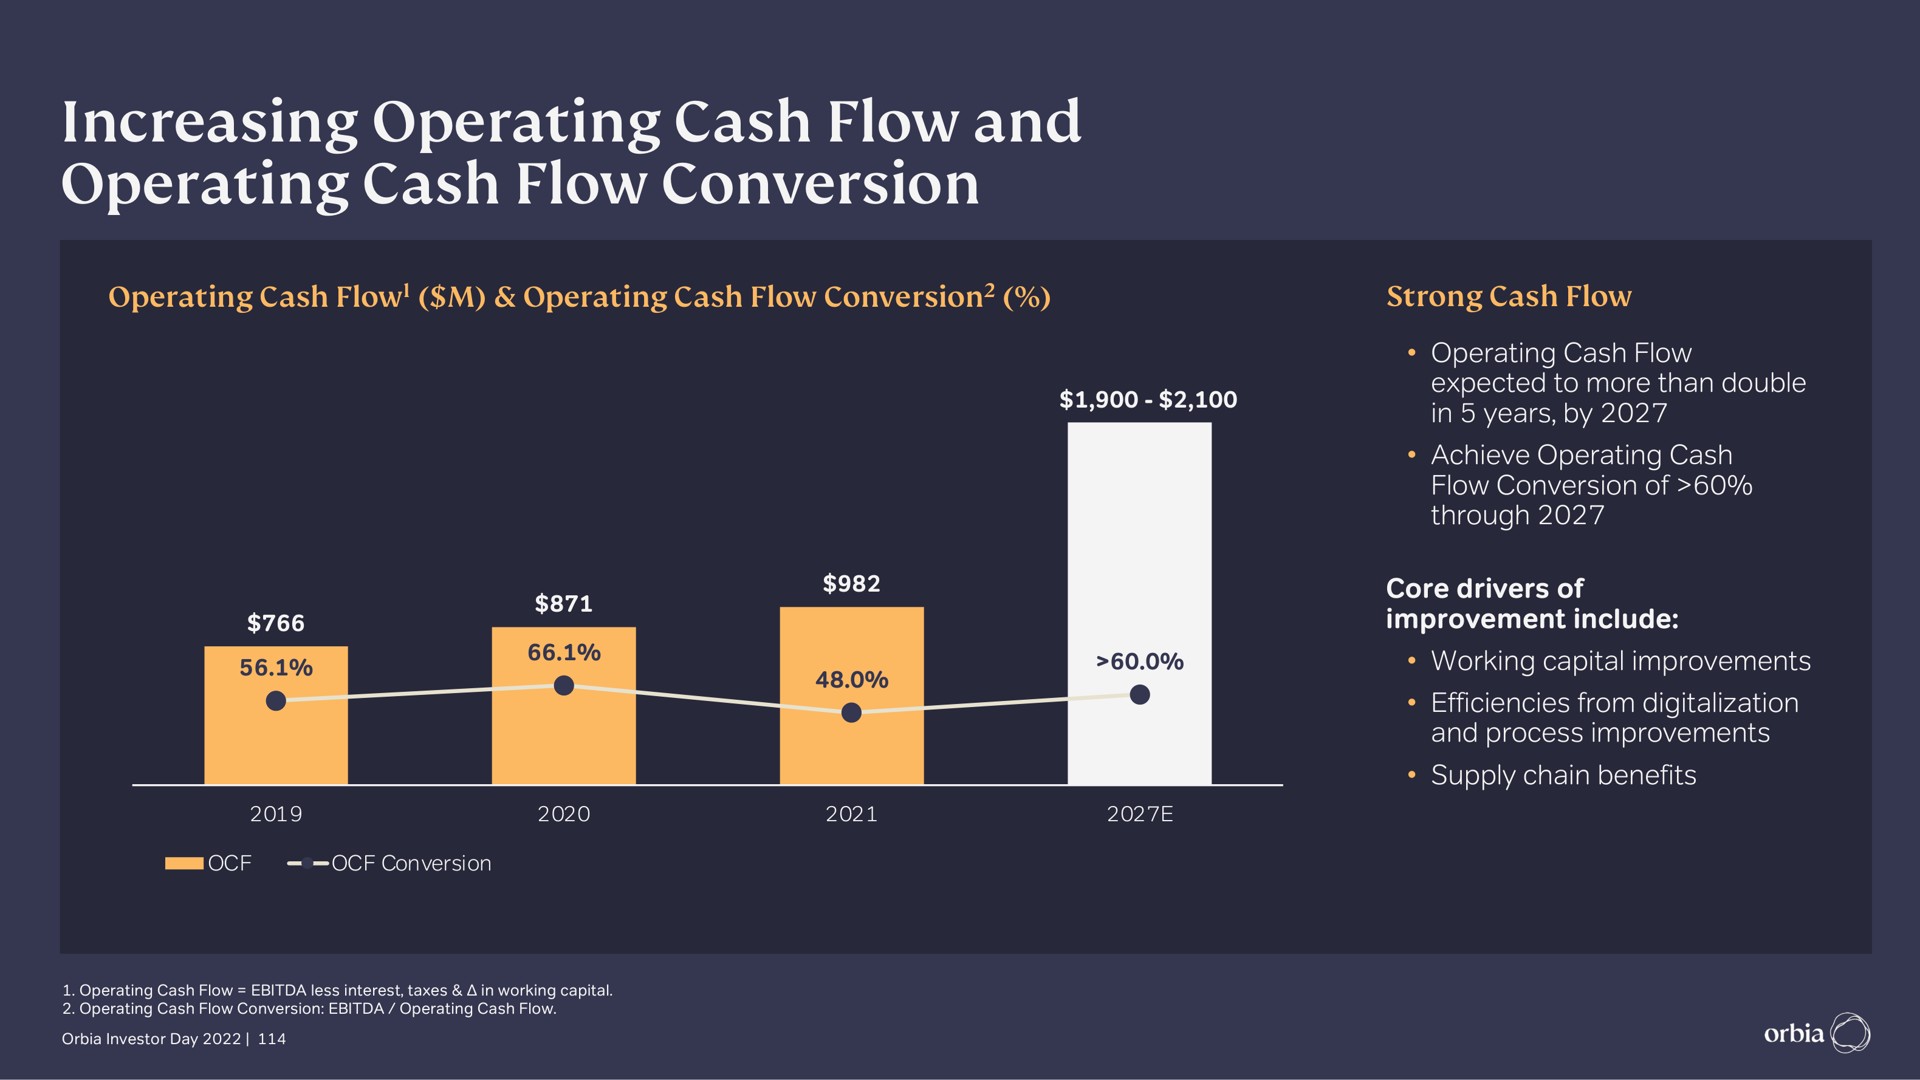 increasing operating cash flow and operating cash flow conversion | Orbia